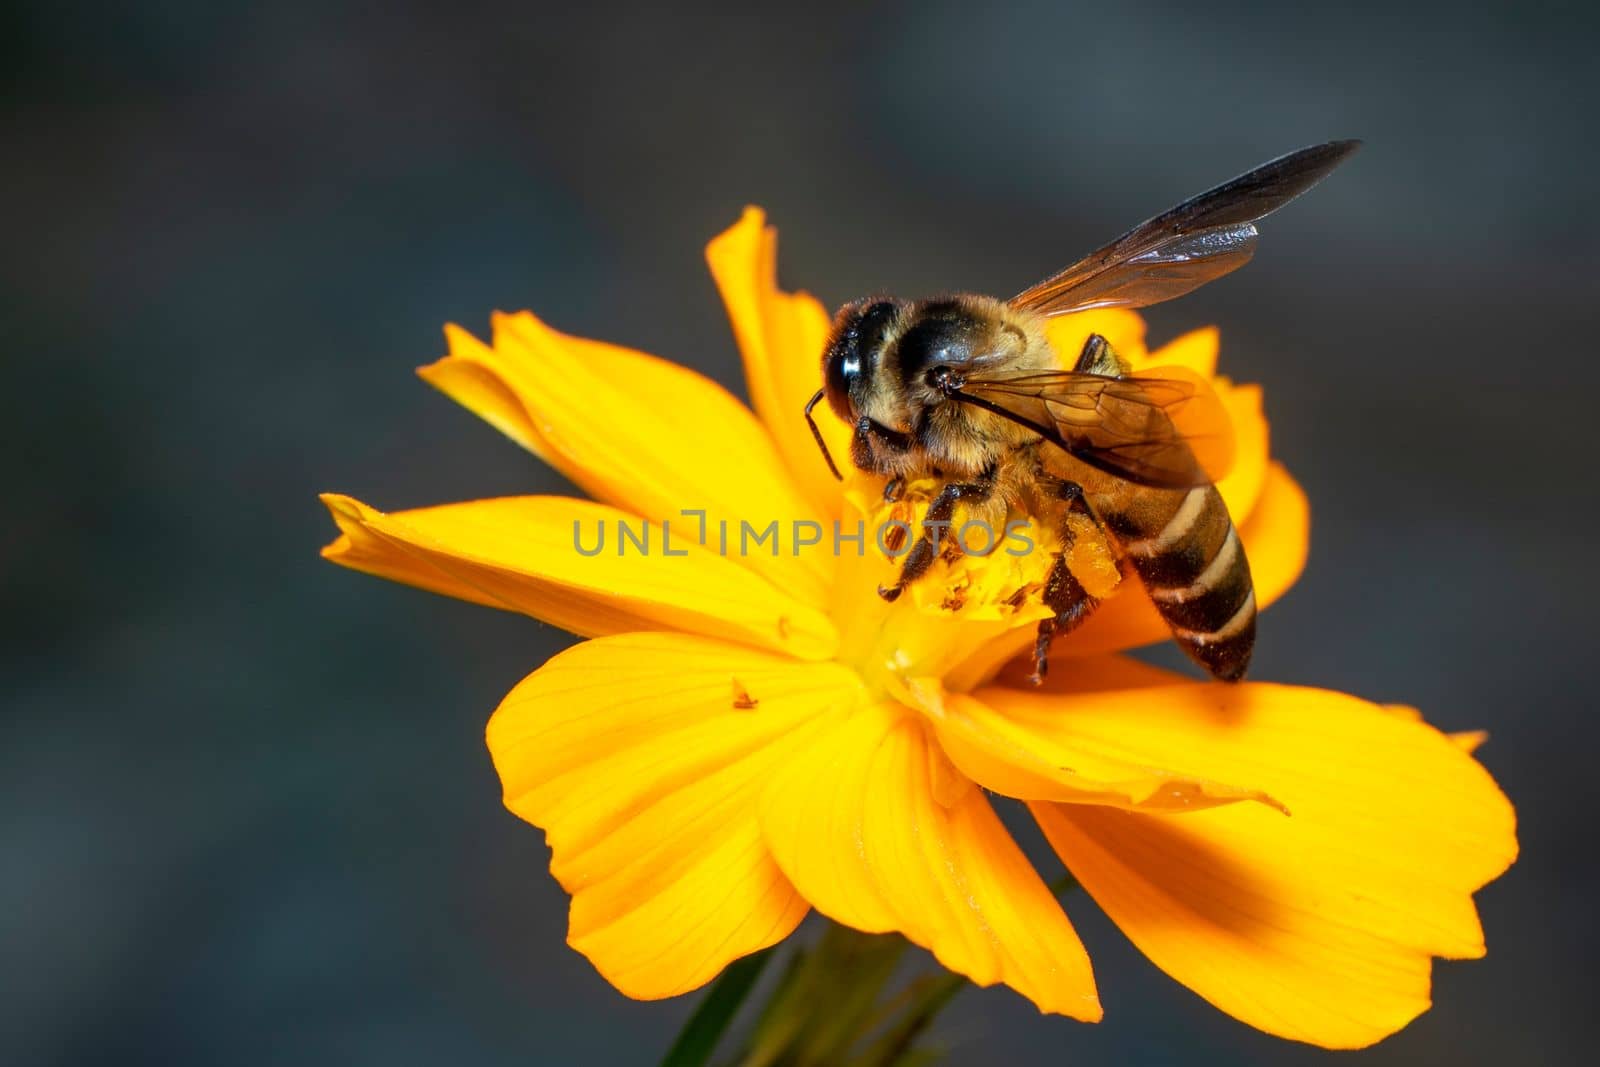 Image of giant honey bee(Apis dorsata) on yellow flower collects nectar on a natural background. Golden honeybee on flower pollen. Insect. Animal. by yod67